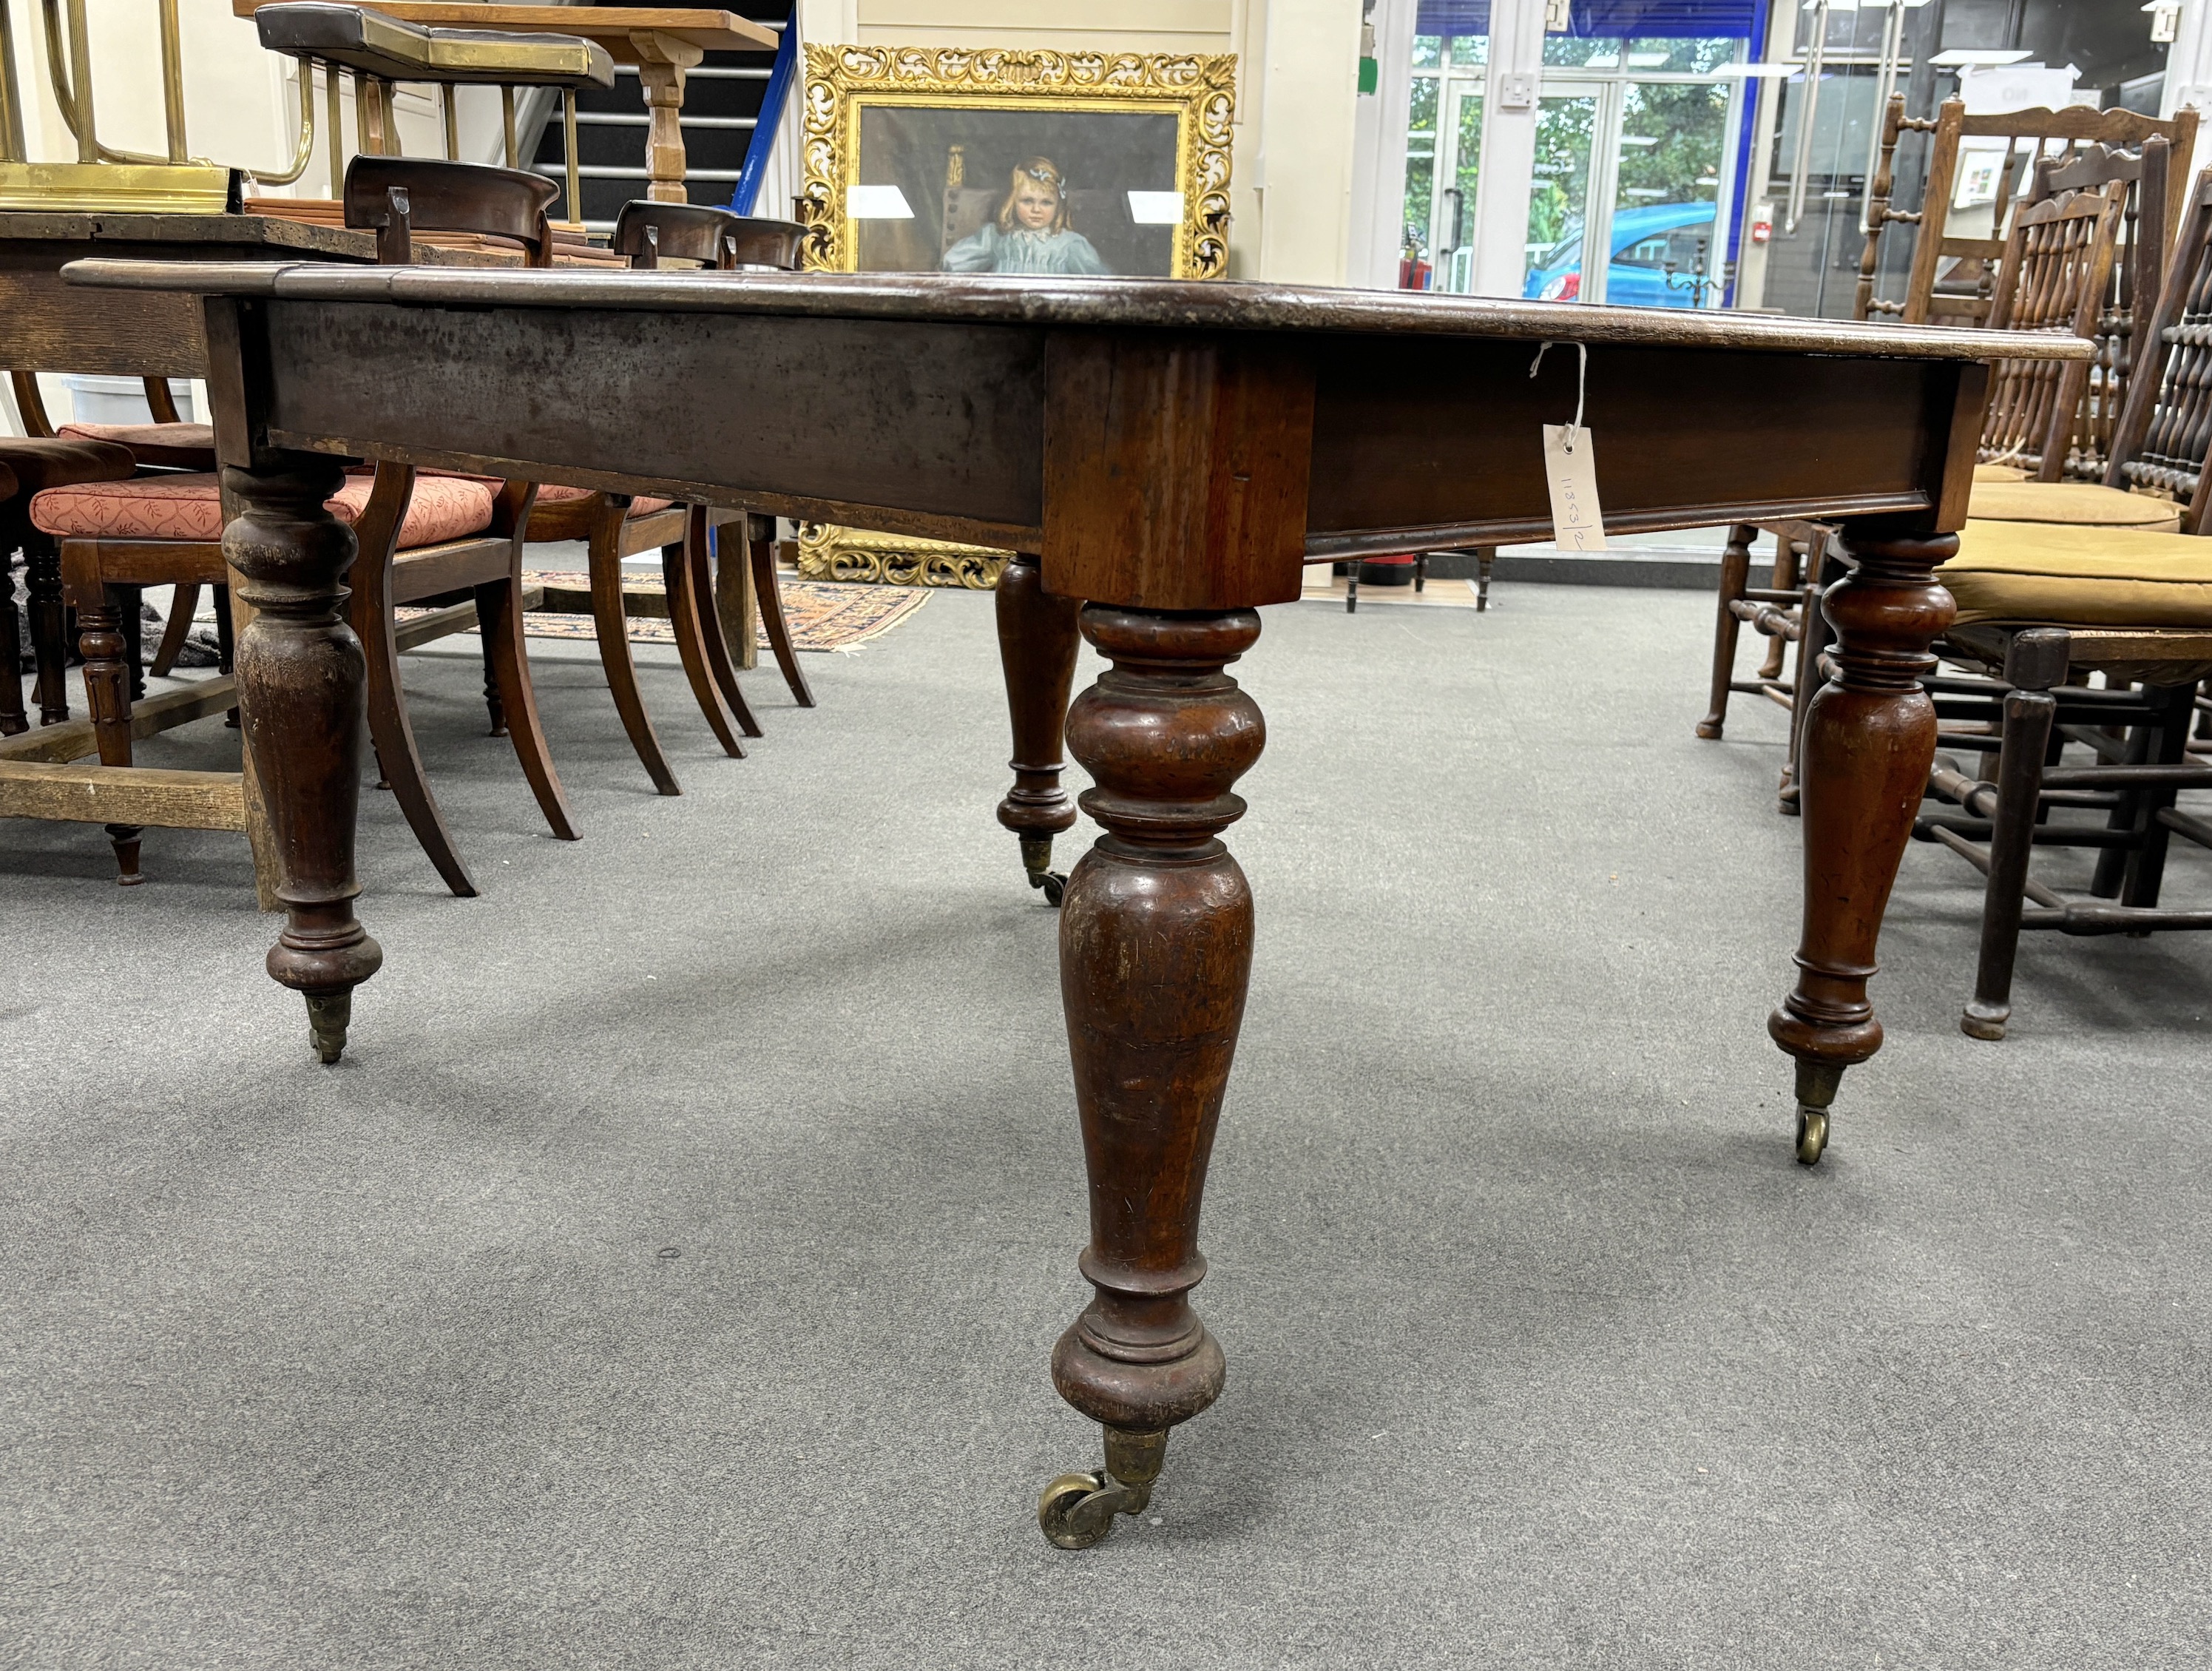 A Victorian mahogany dining table, no leaves, width 128cm, depth 122cm, height 73cm